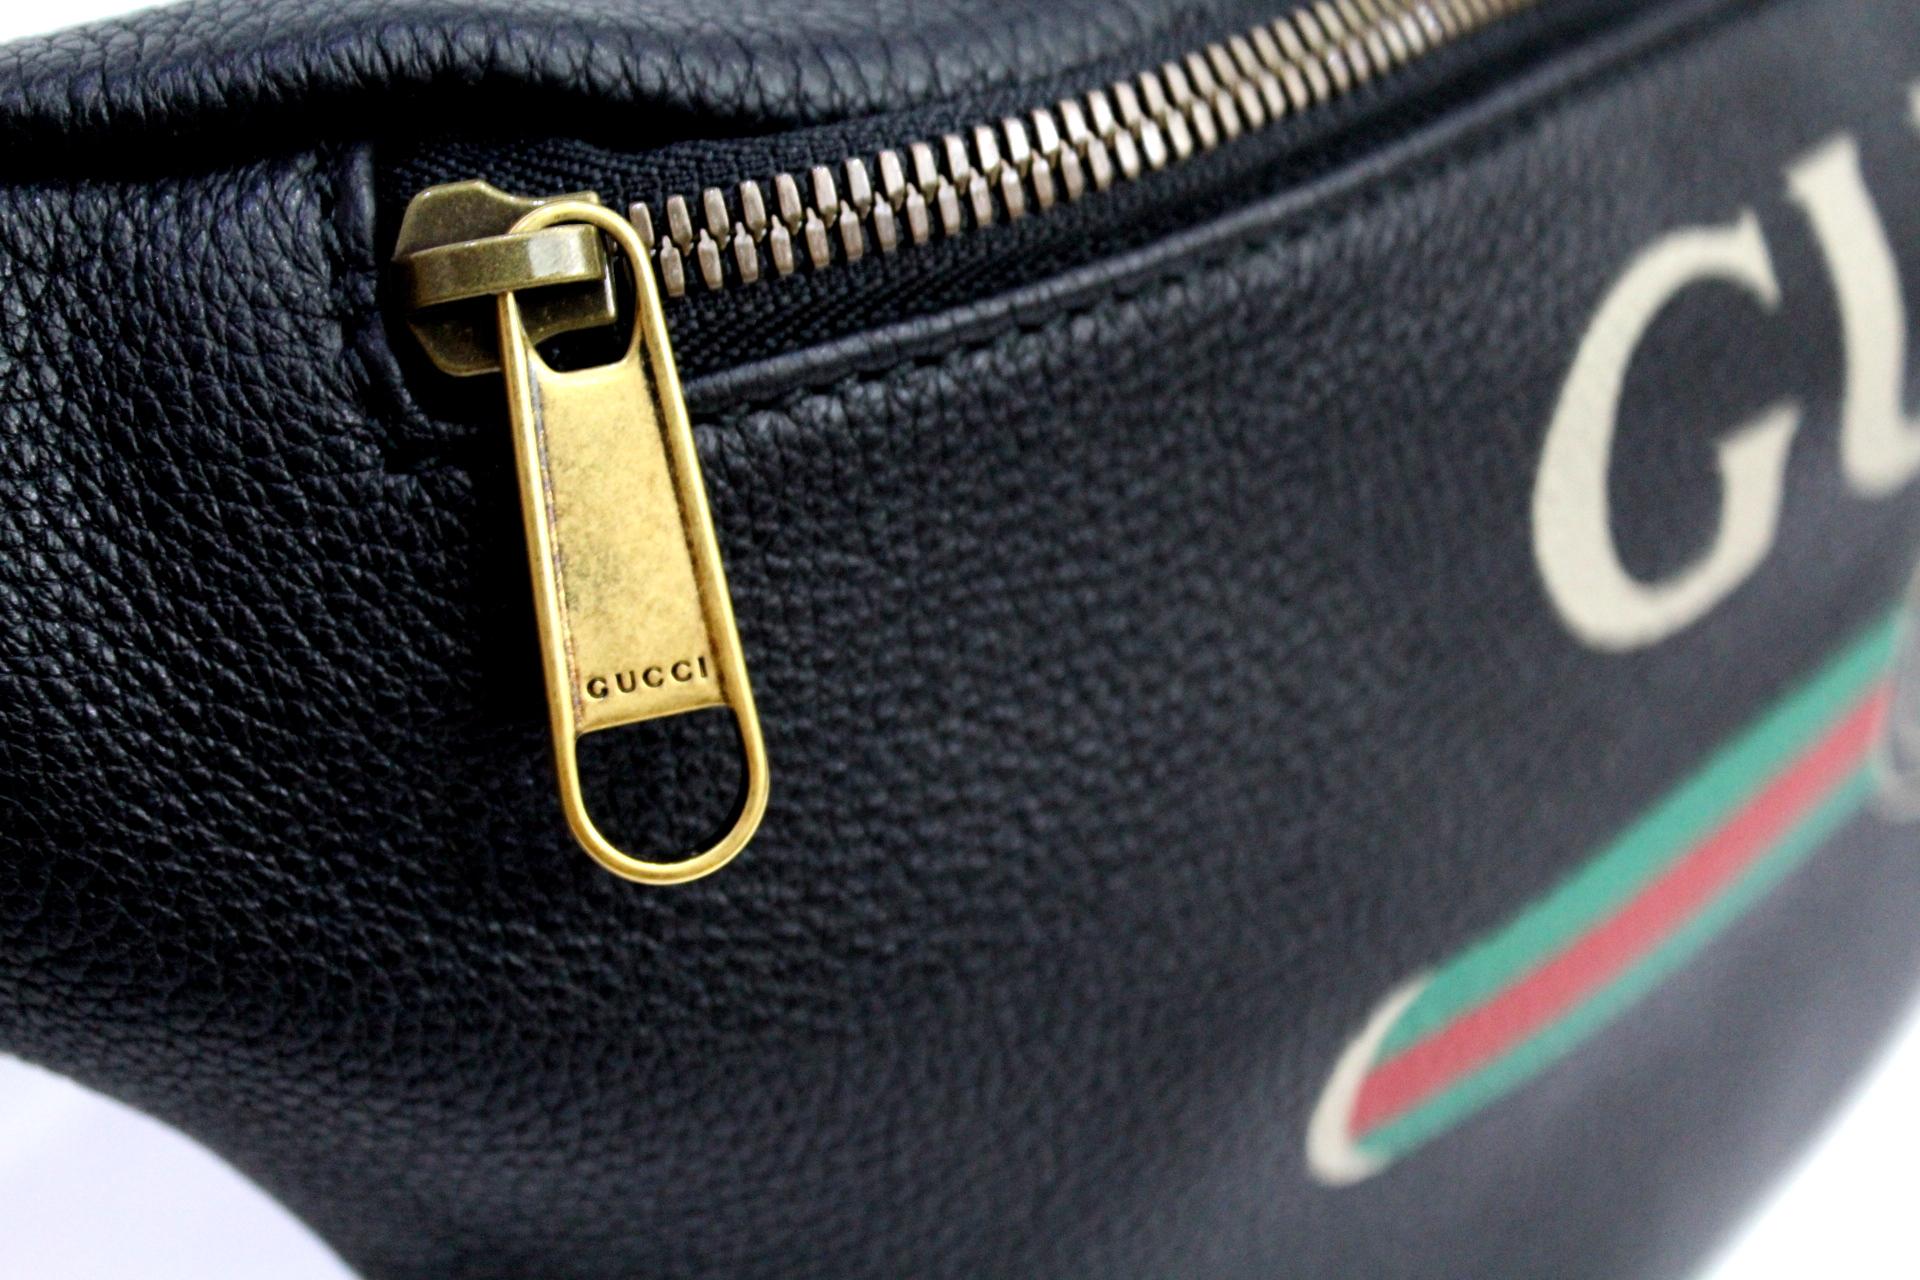 Gucci belt bag made in leather with front zipper and vintage logo. Nylon belt with red and green web pattern.